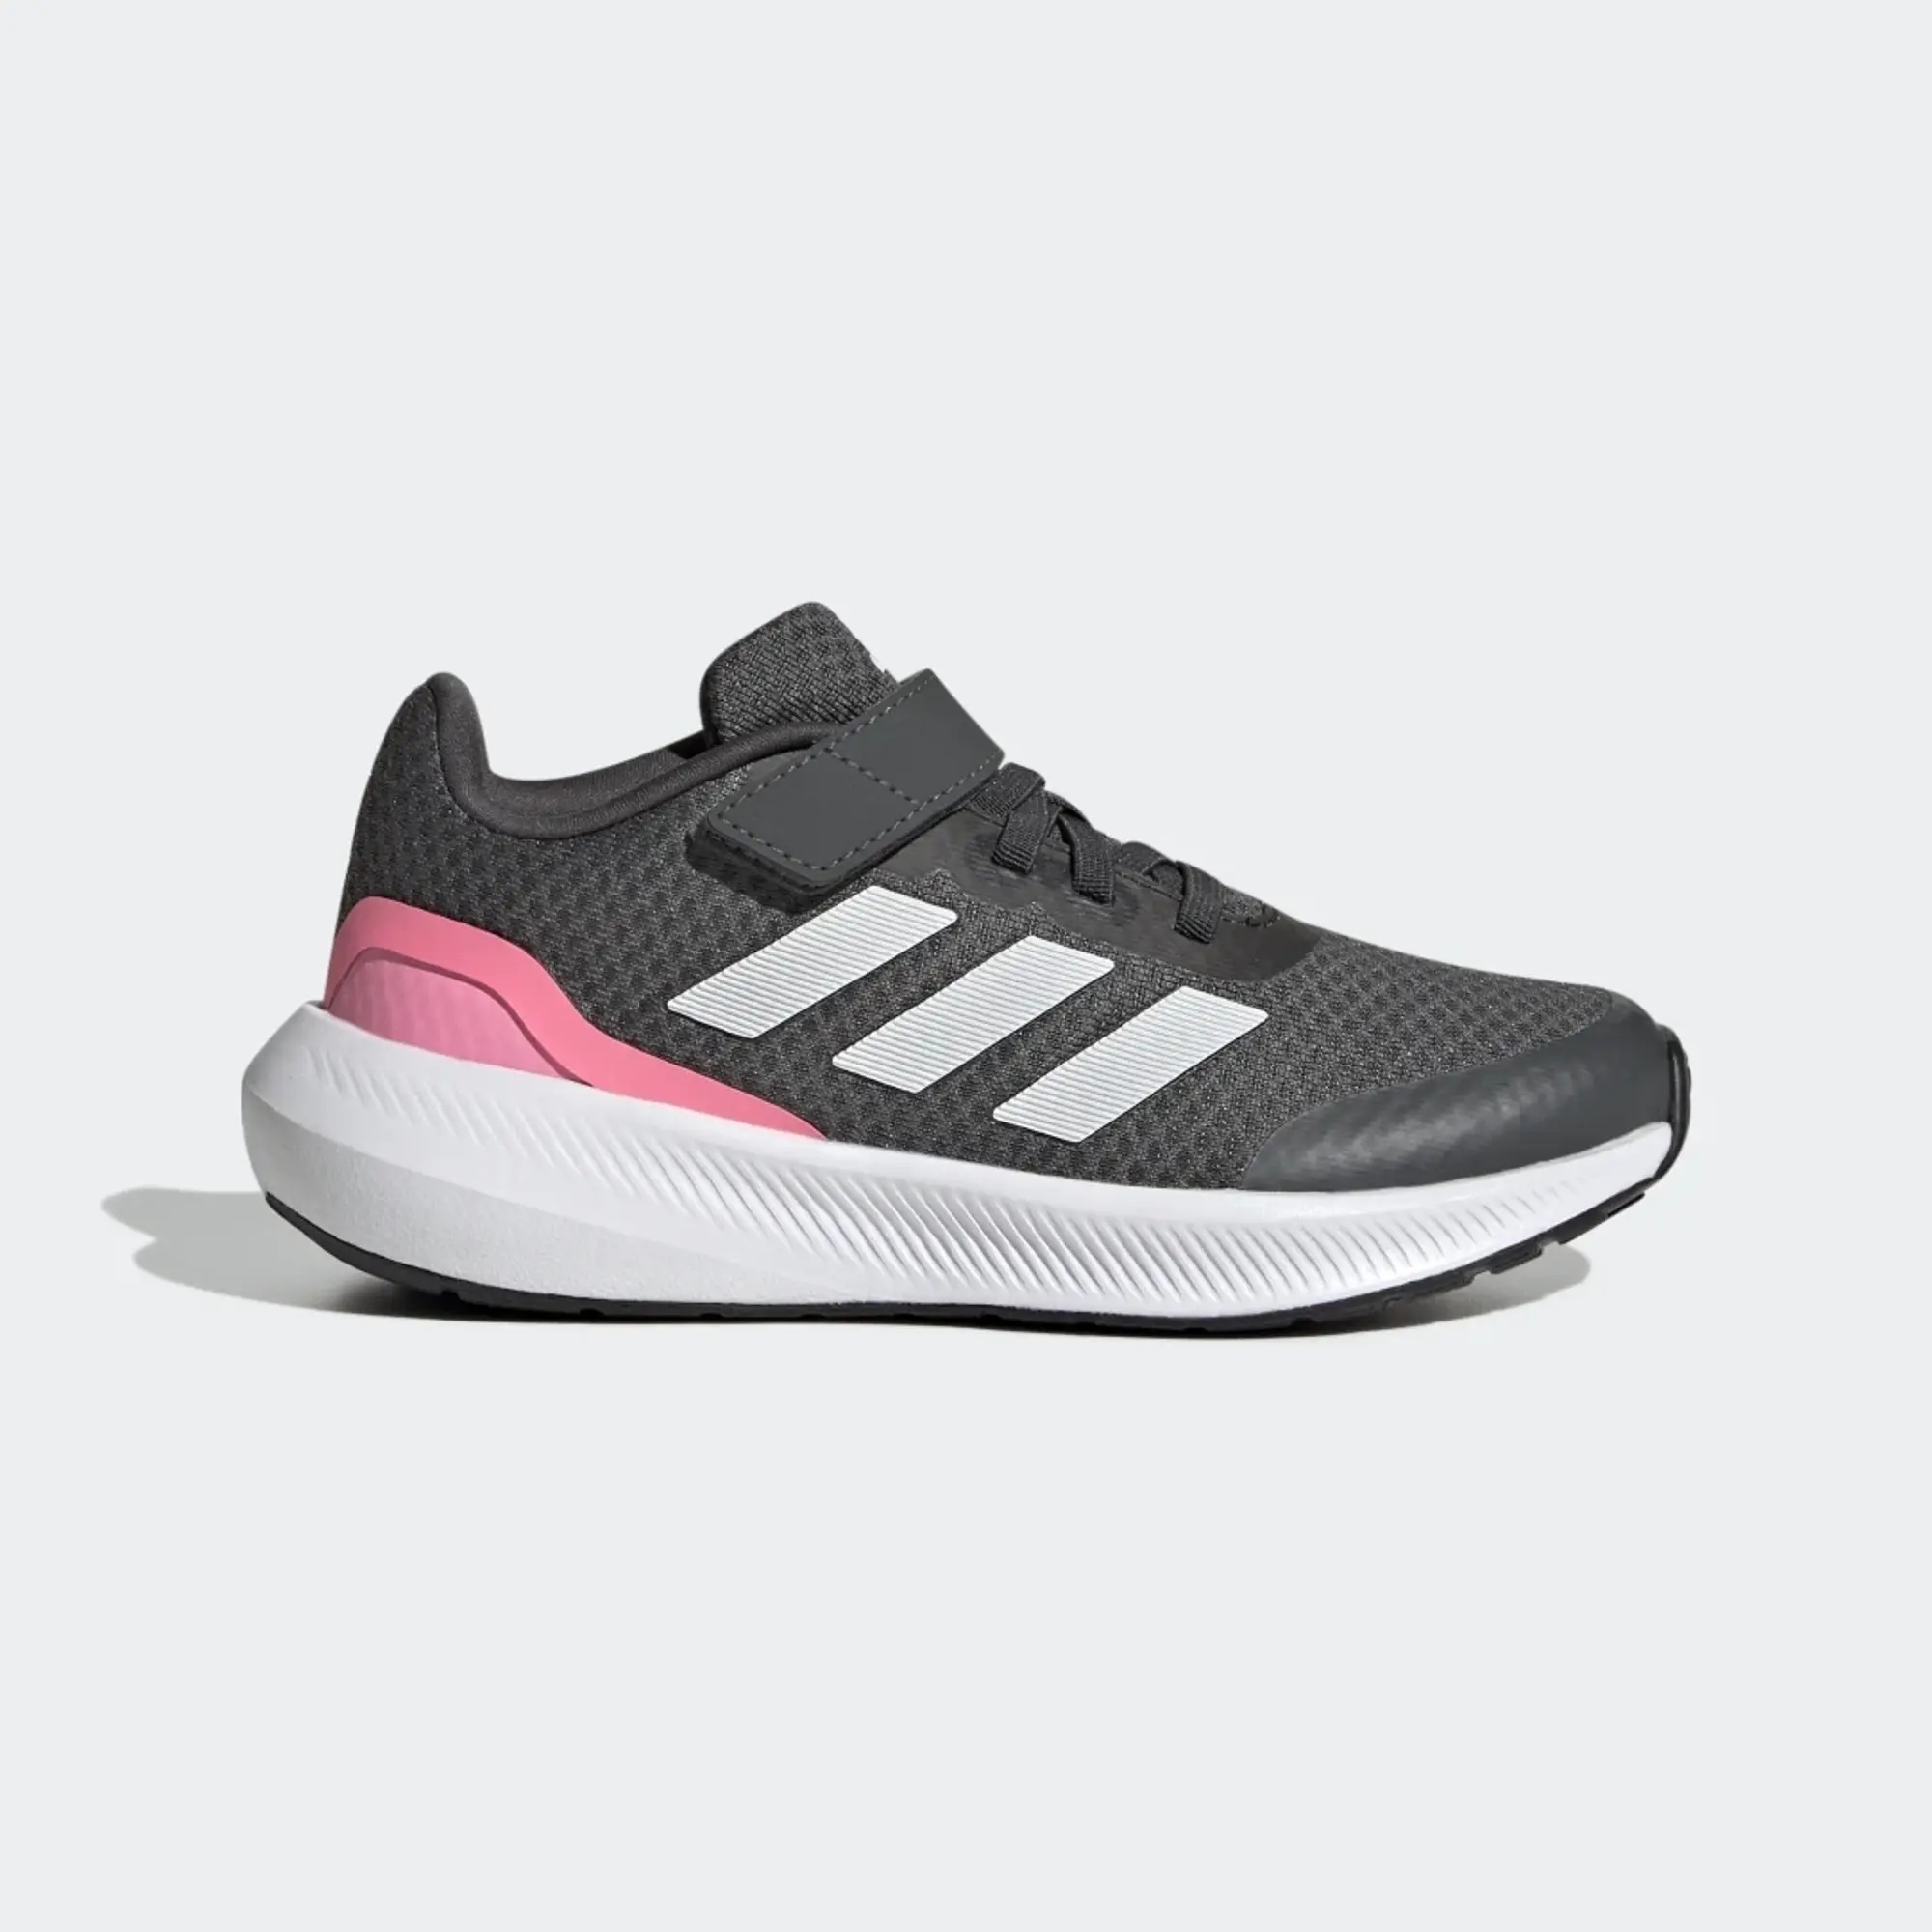 adidas RunFalcon 3.0 Elastic - Strap Grey Crystal Lace Six Shoes | Beam / / White HP5873 Pink Top